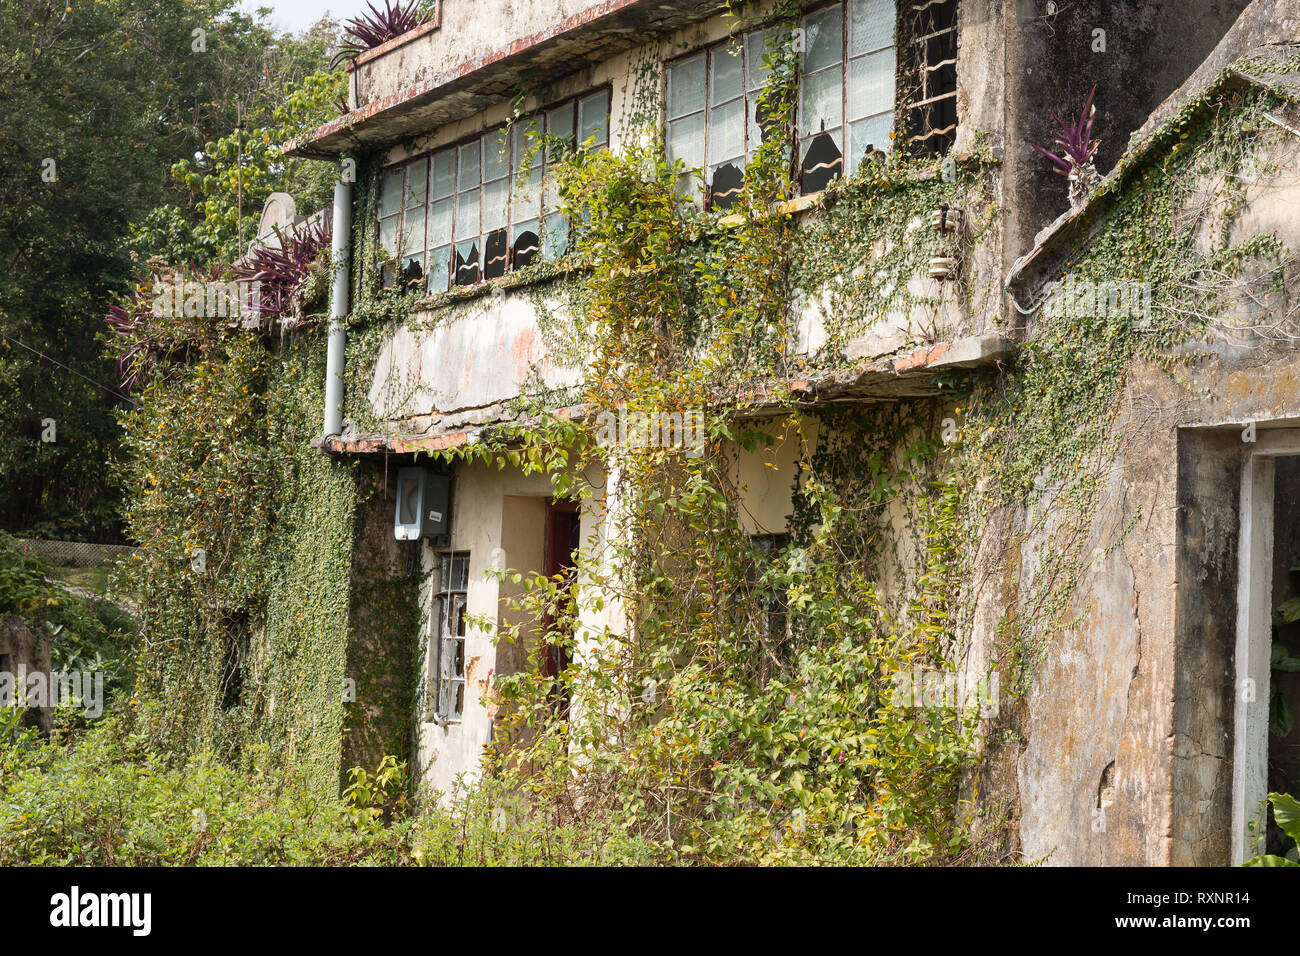 Yim Tin Tsai, an island near Sai Kung, Hong Kong which is home to an abandoned fishing village that now stands decaying and overgrown. Stock Photo